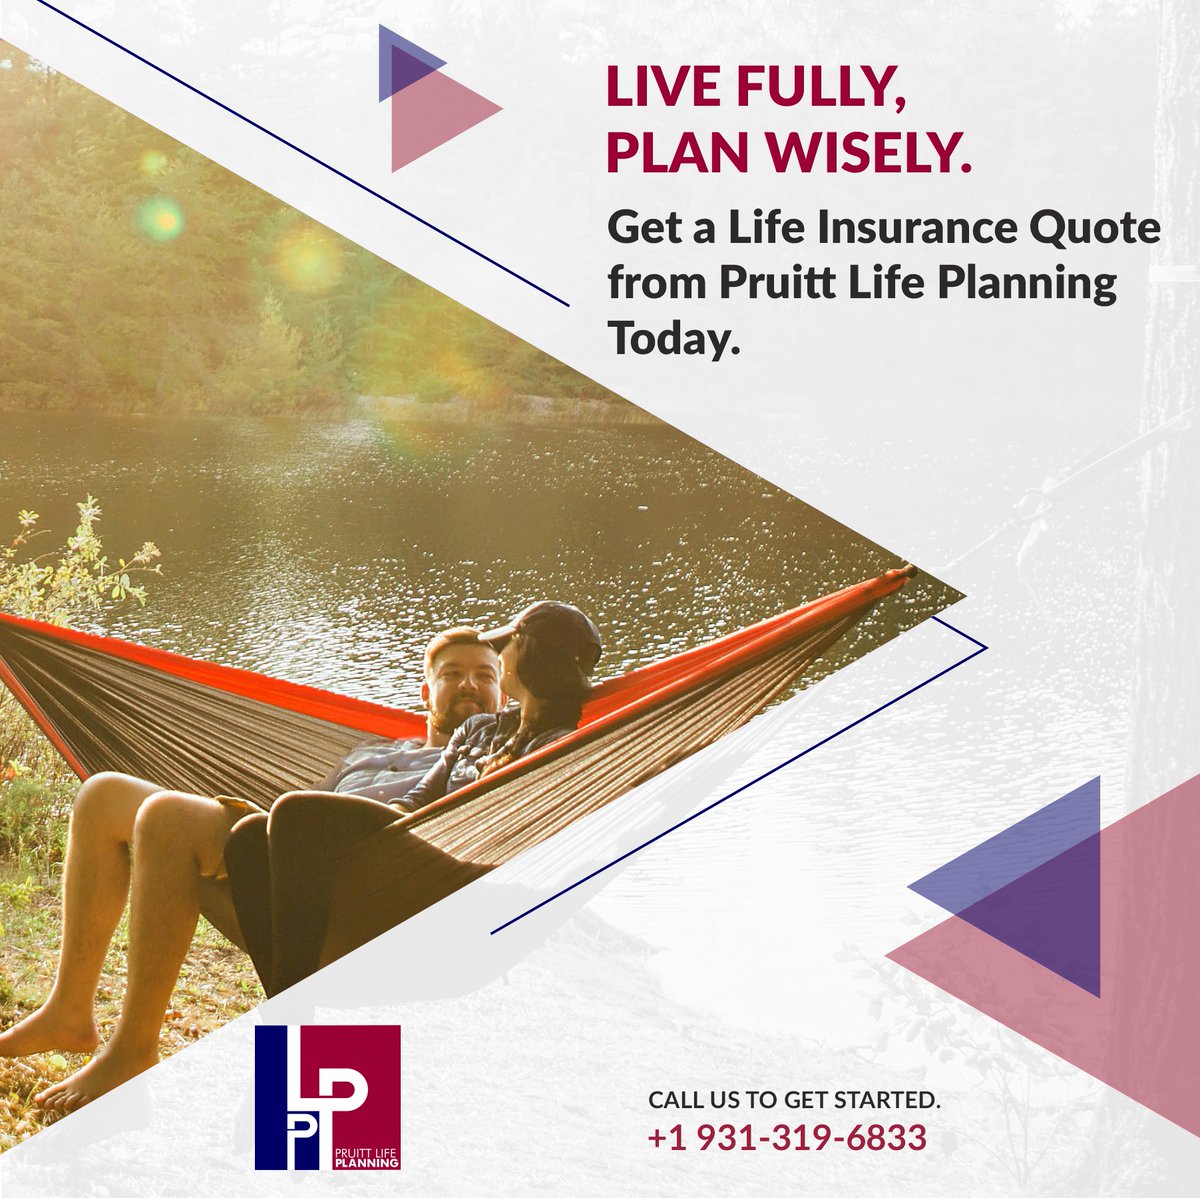 Let us guide you towards financial freedom and peace of mind. 💼💡

Call Us On +1 931-319-6833

#PruittLifePlanning #FinancialFreedom #PlanWisely #WealthManagement #SecureYourFuture #SmartInvesting #FinancialPlanning #LiveFully